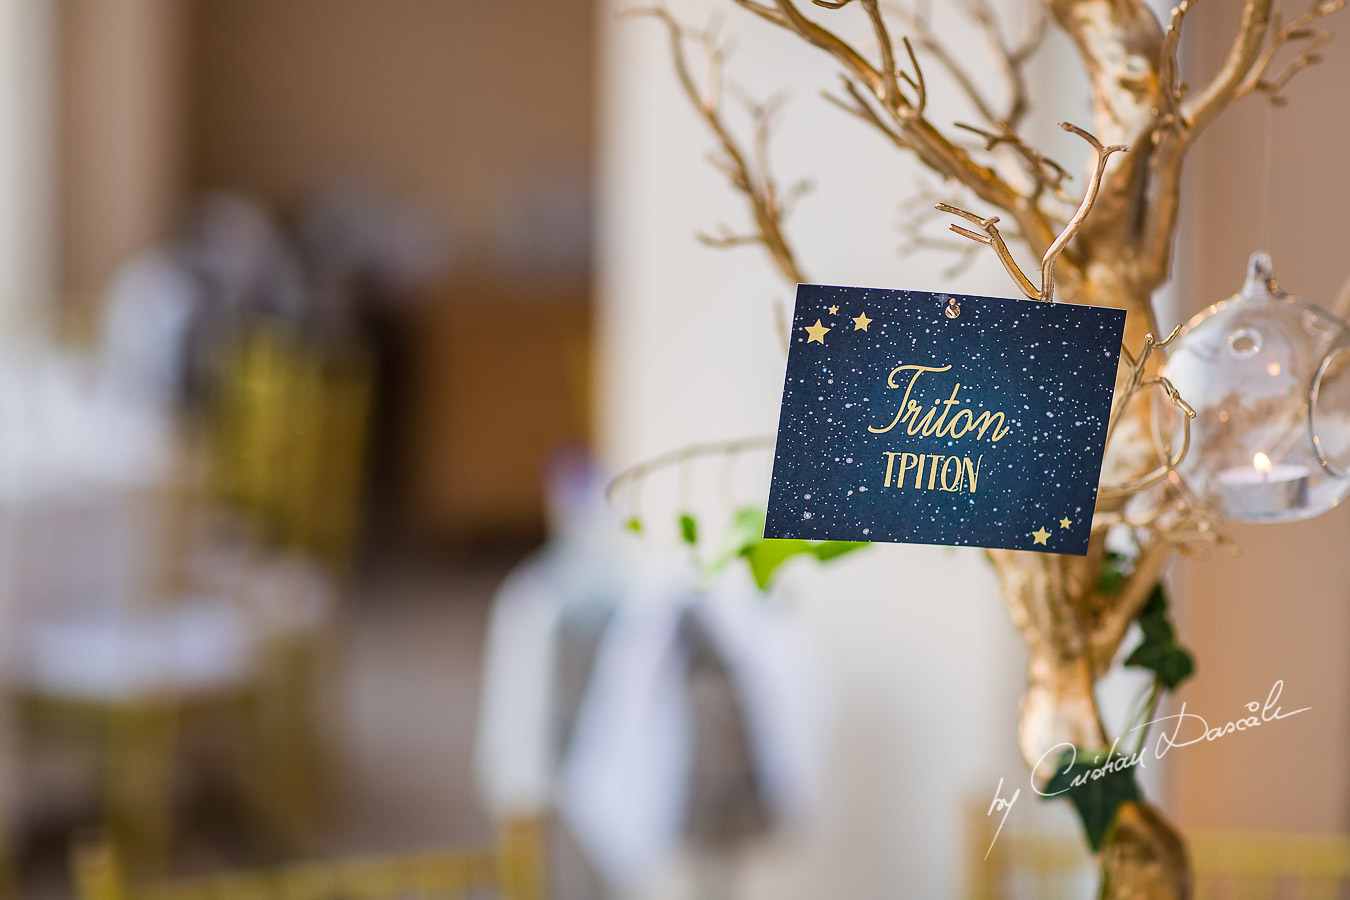 Simply beautiful wedding details captured by Cristian Dascalu at an amazing Wedding at Elea Estate in Paphos, Cyprus.